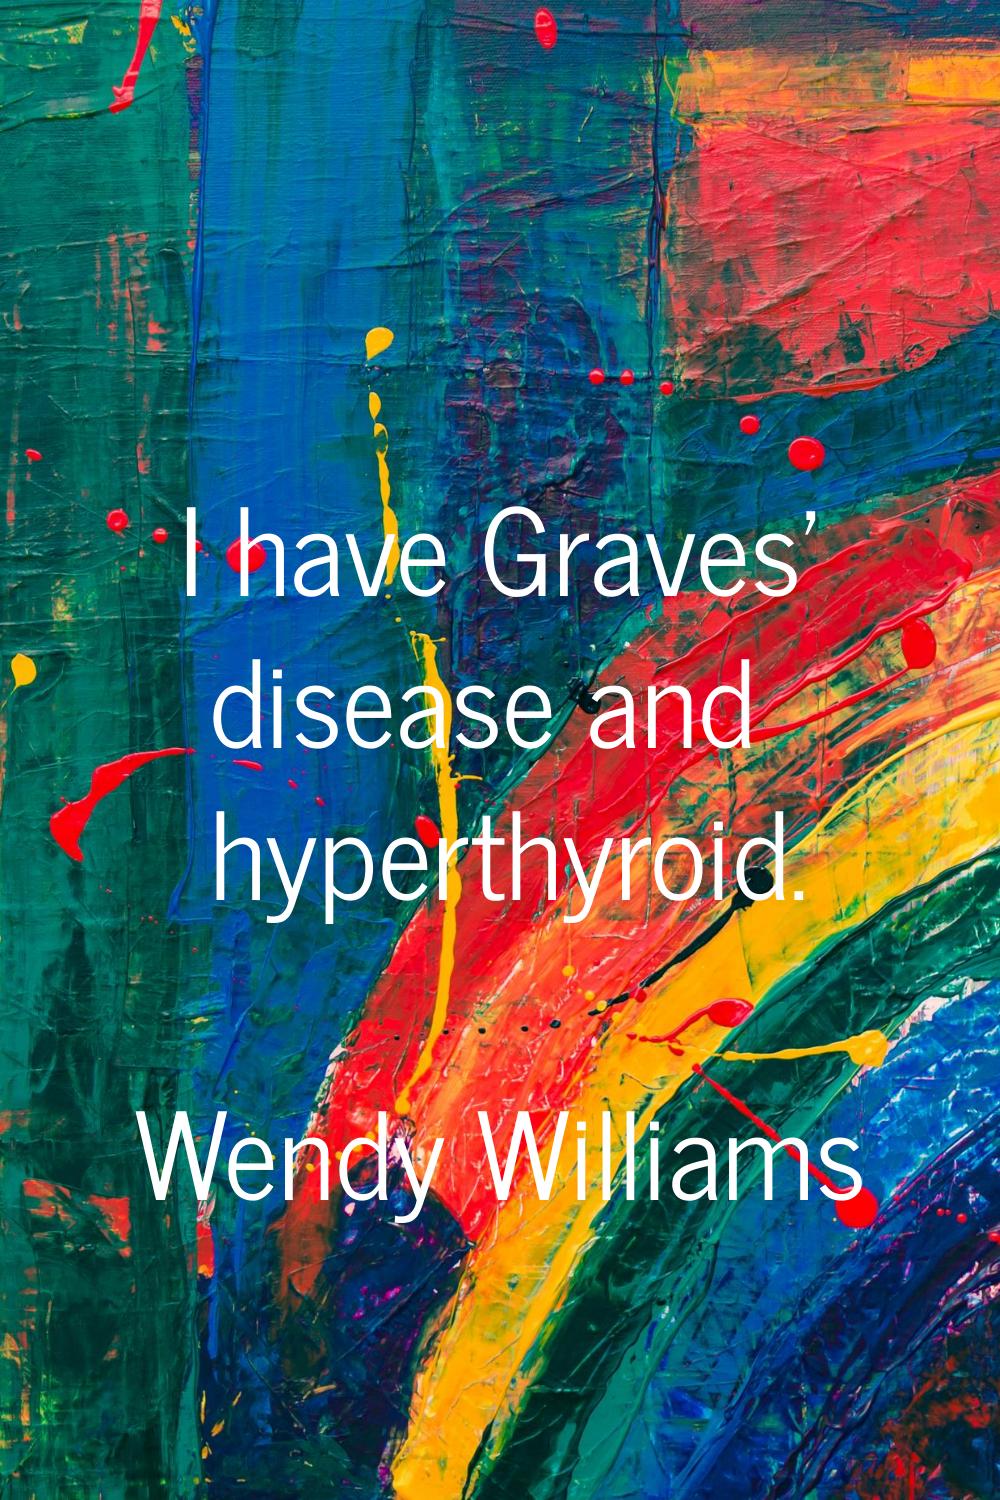 I have Graves' disease and hyperthyroid.